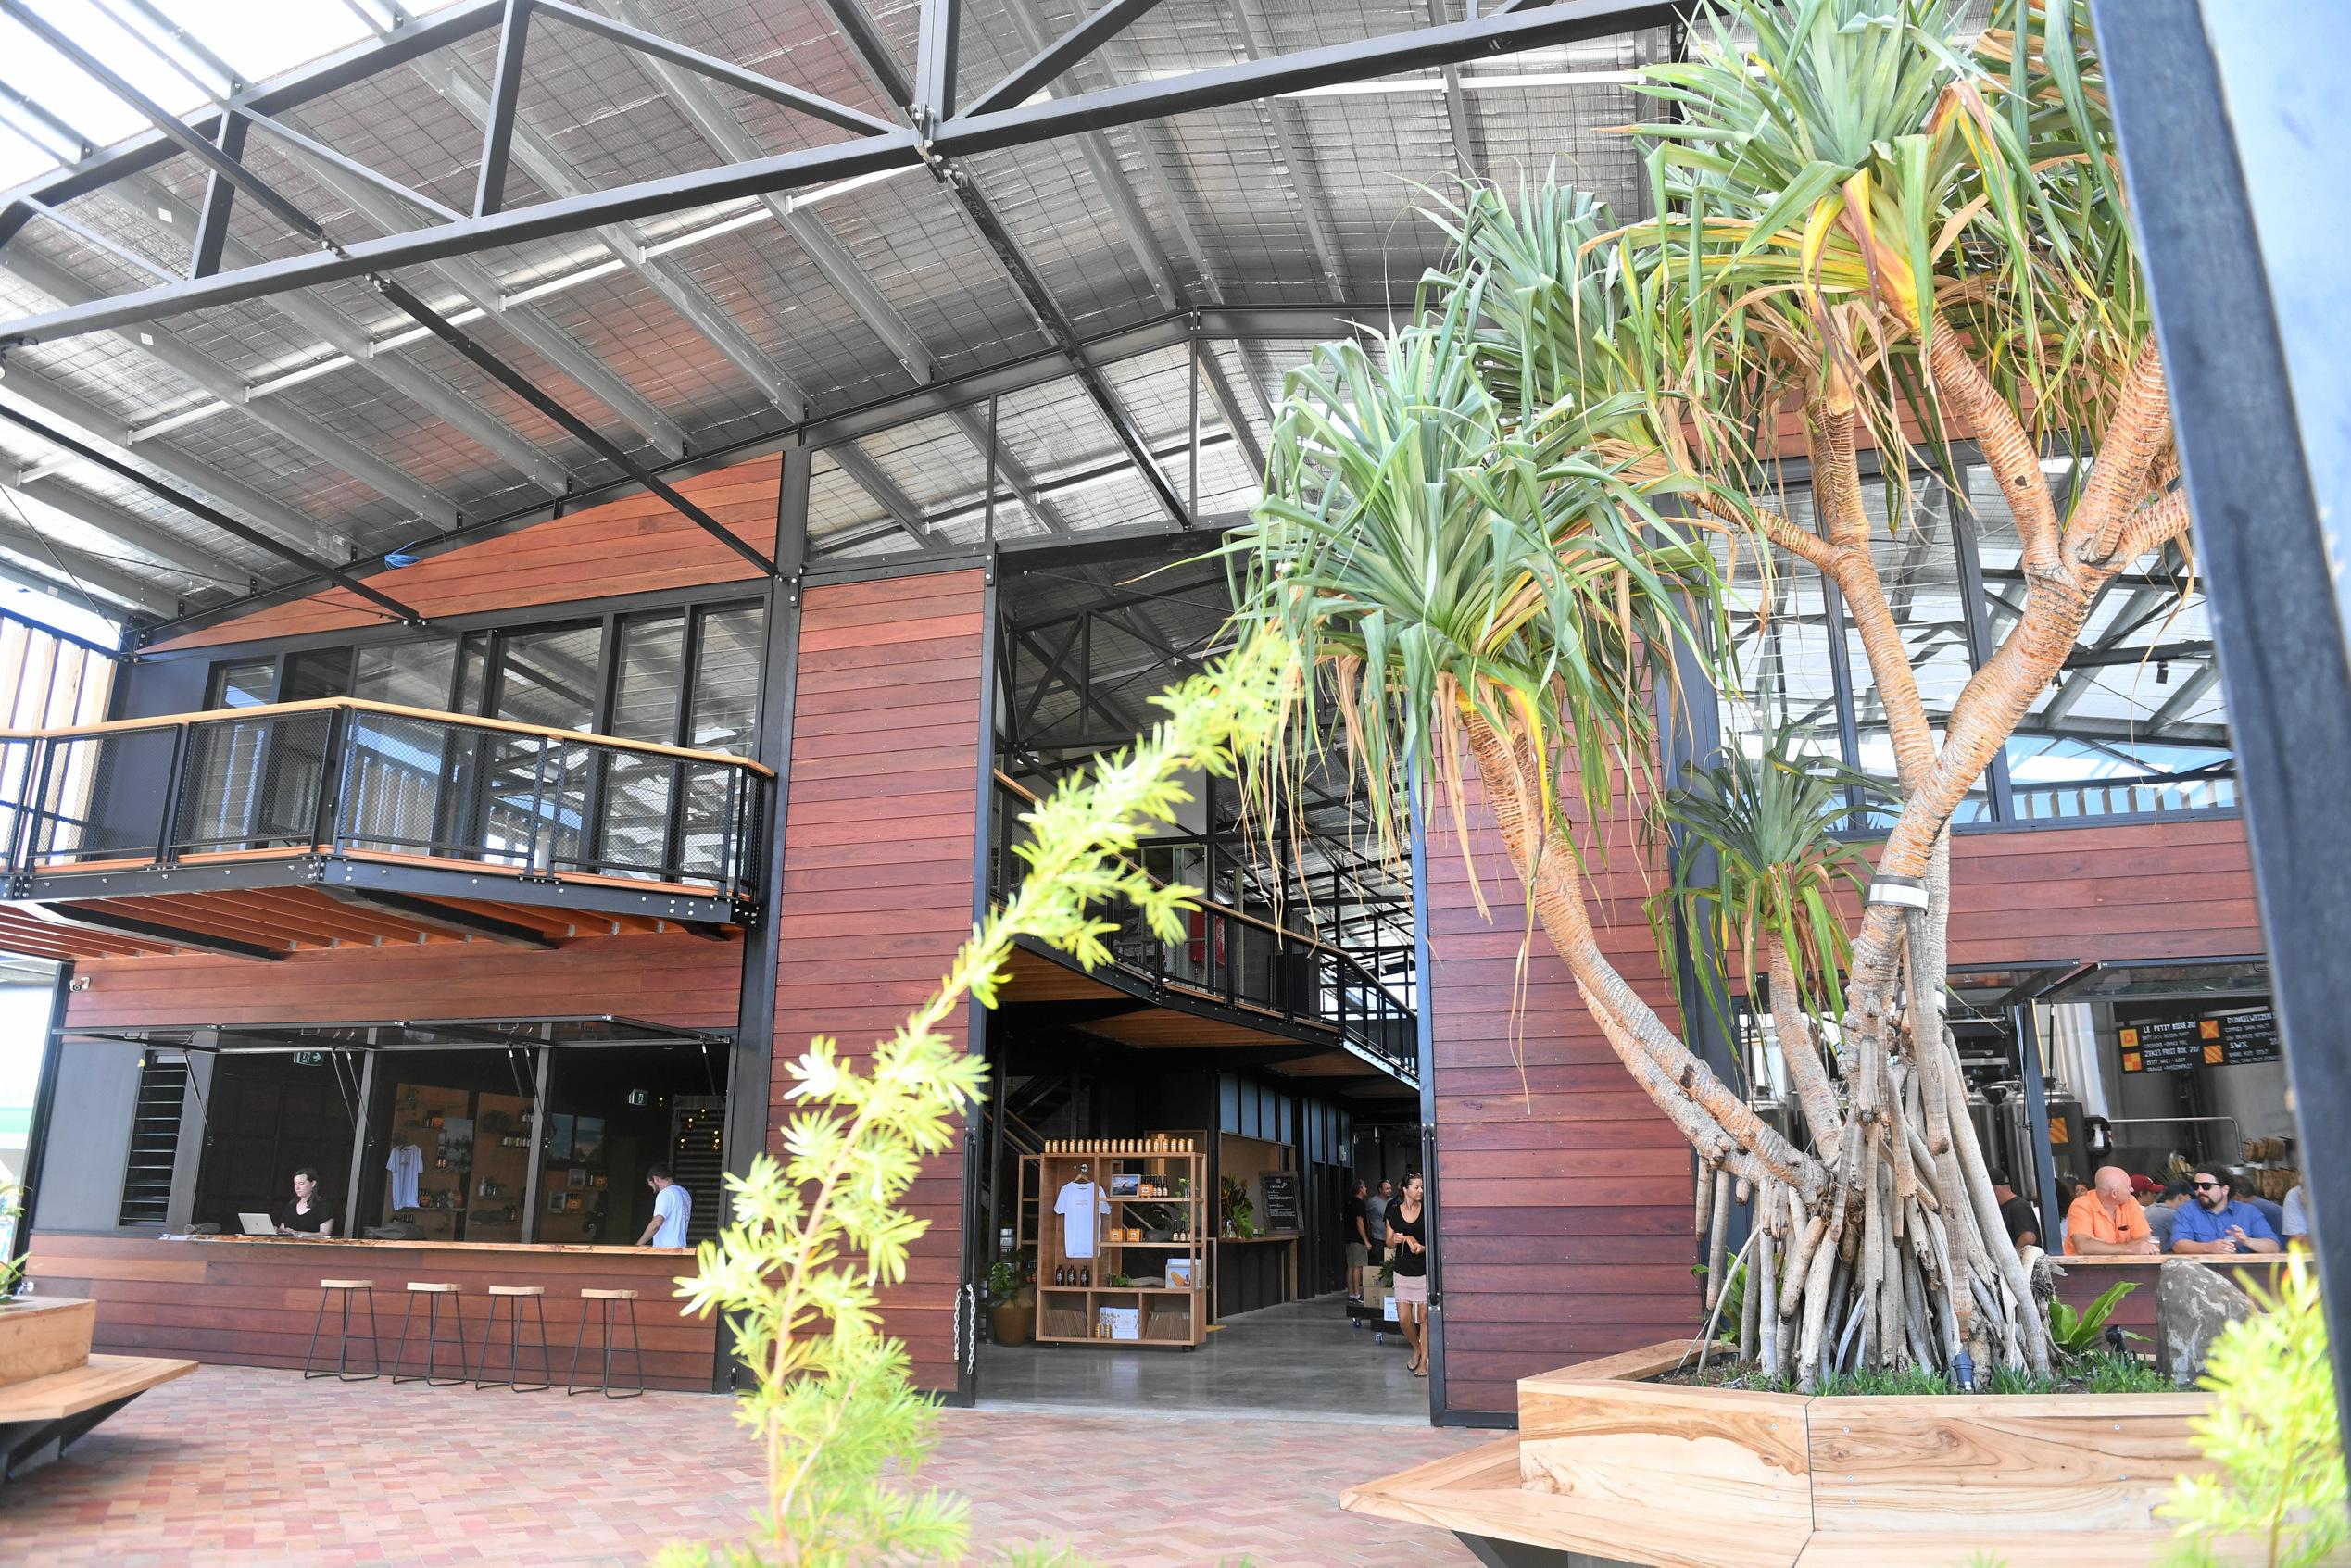 The Stone and Wood Brewery located at 100 Centennial Circuit in Byron Bay has been designed around the best possible customer experience.